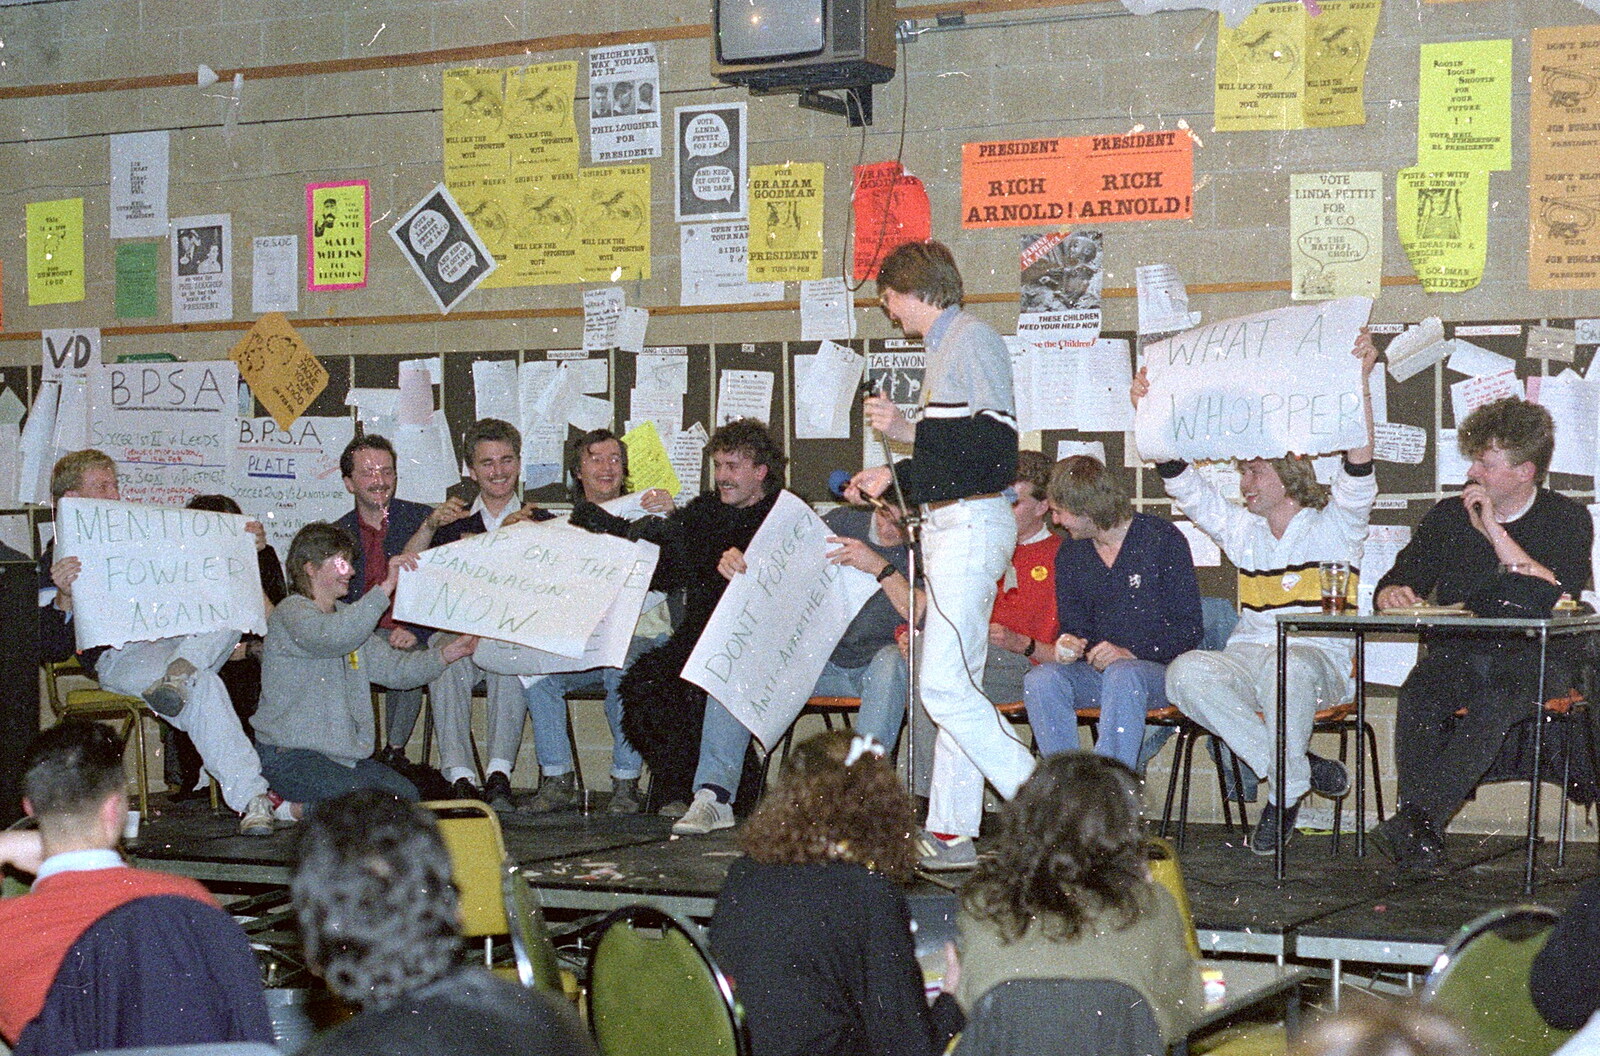 'Mention Fowler again' is waved around from Uni: PPSU Sabbatical Election Hustings, Plymouth - 10th February 1986